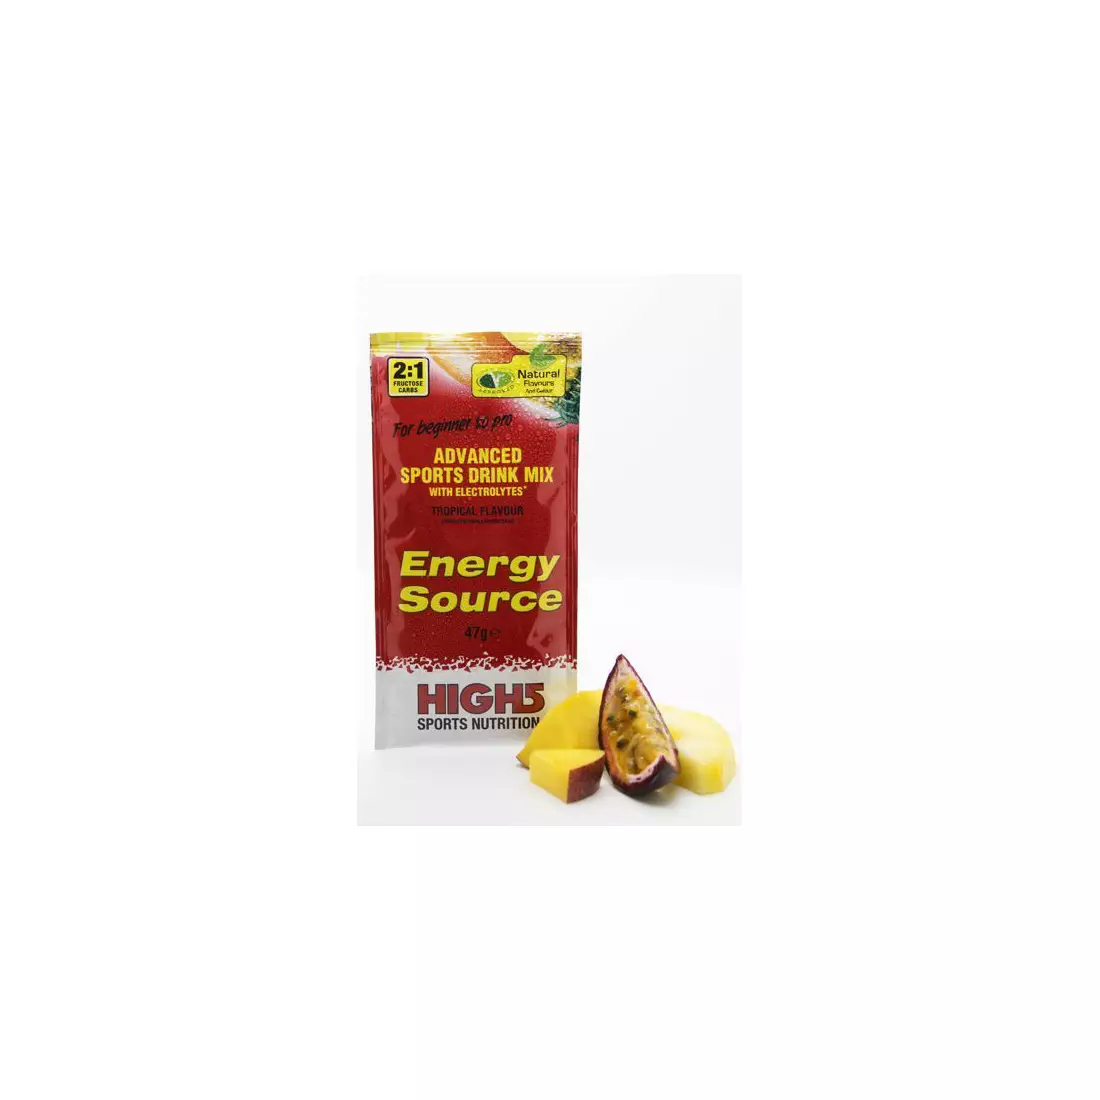 HIGH5 Isotonic isotonic drink powder to dissolve, sachet 47 g, flavor: TROPICAL